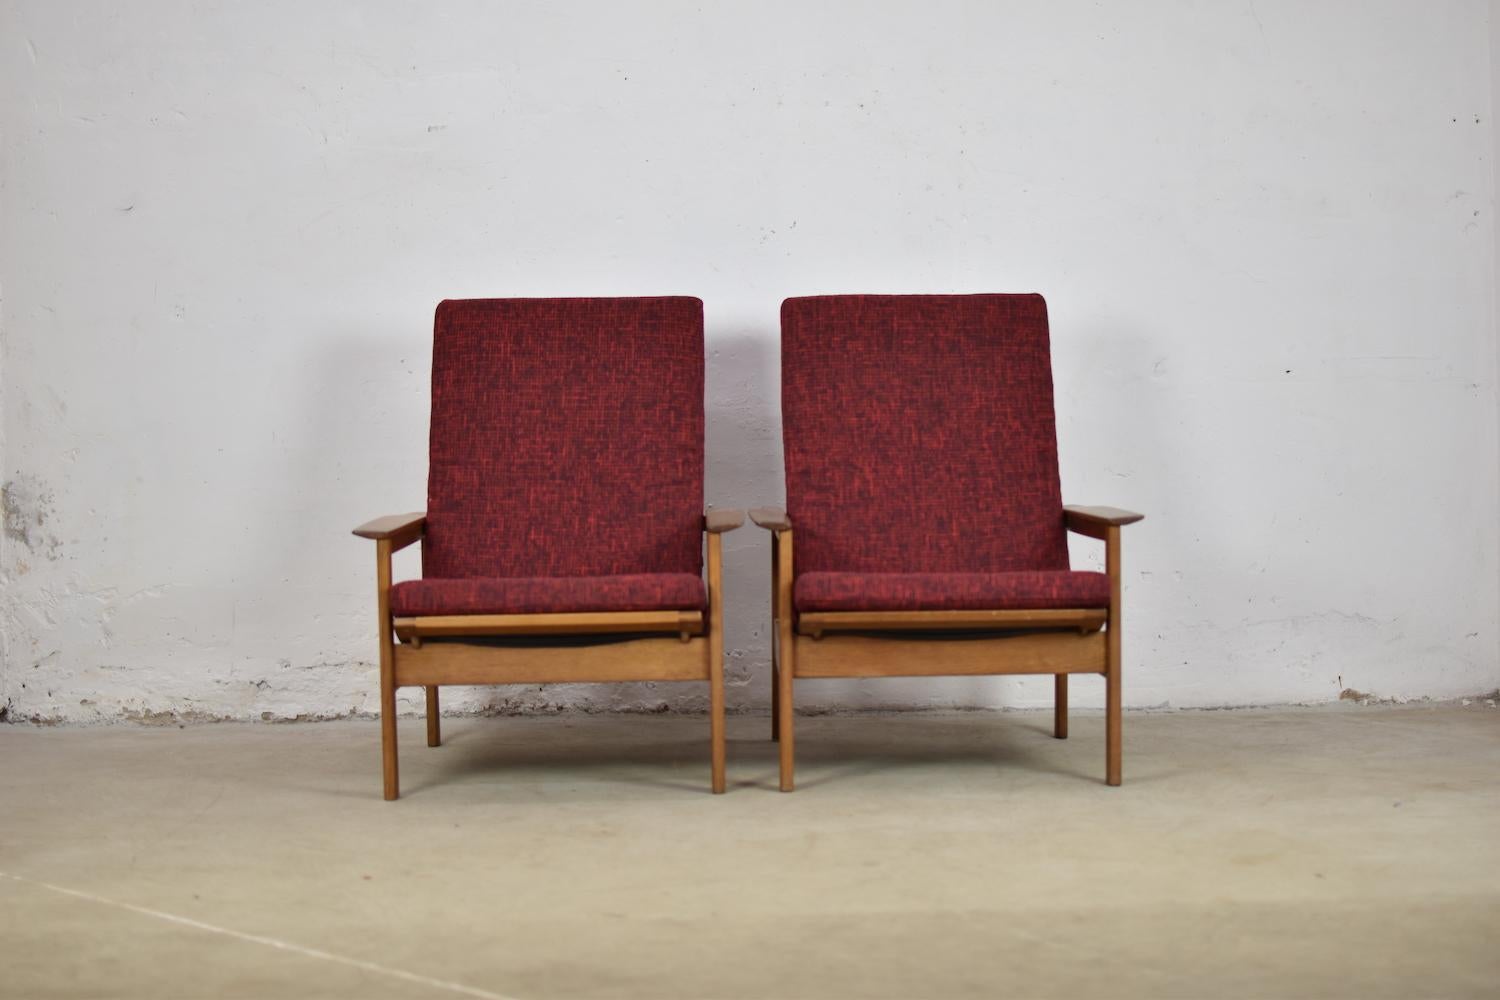 Fabric Pair of Modernist Lounge Chairs by Georges Vanrijk for Beaufort, Belgium, 1960s